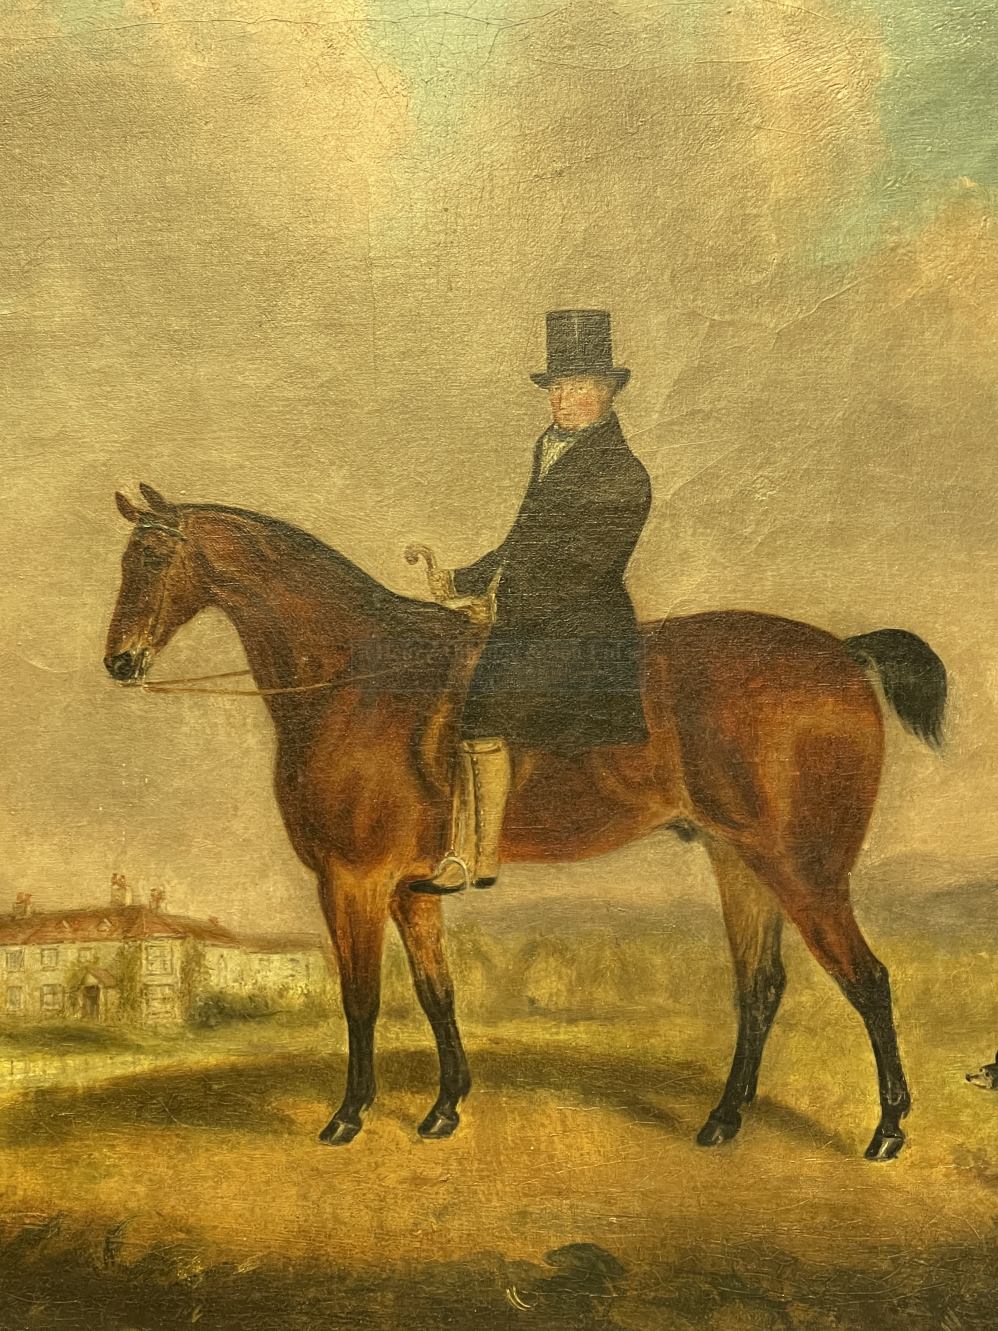 19th cent. English School: Oil on canvas, Gentleman Rider with Estate in background, attributed to - Image 2 of 2